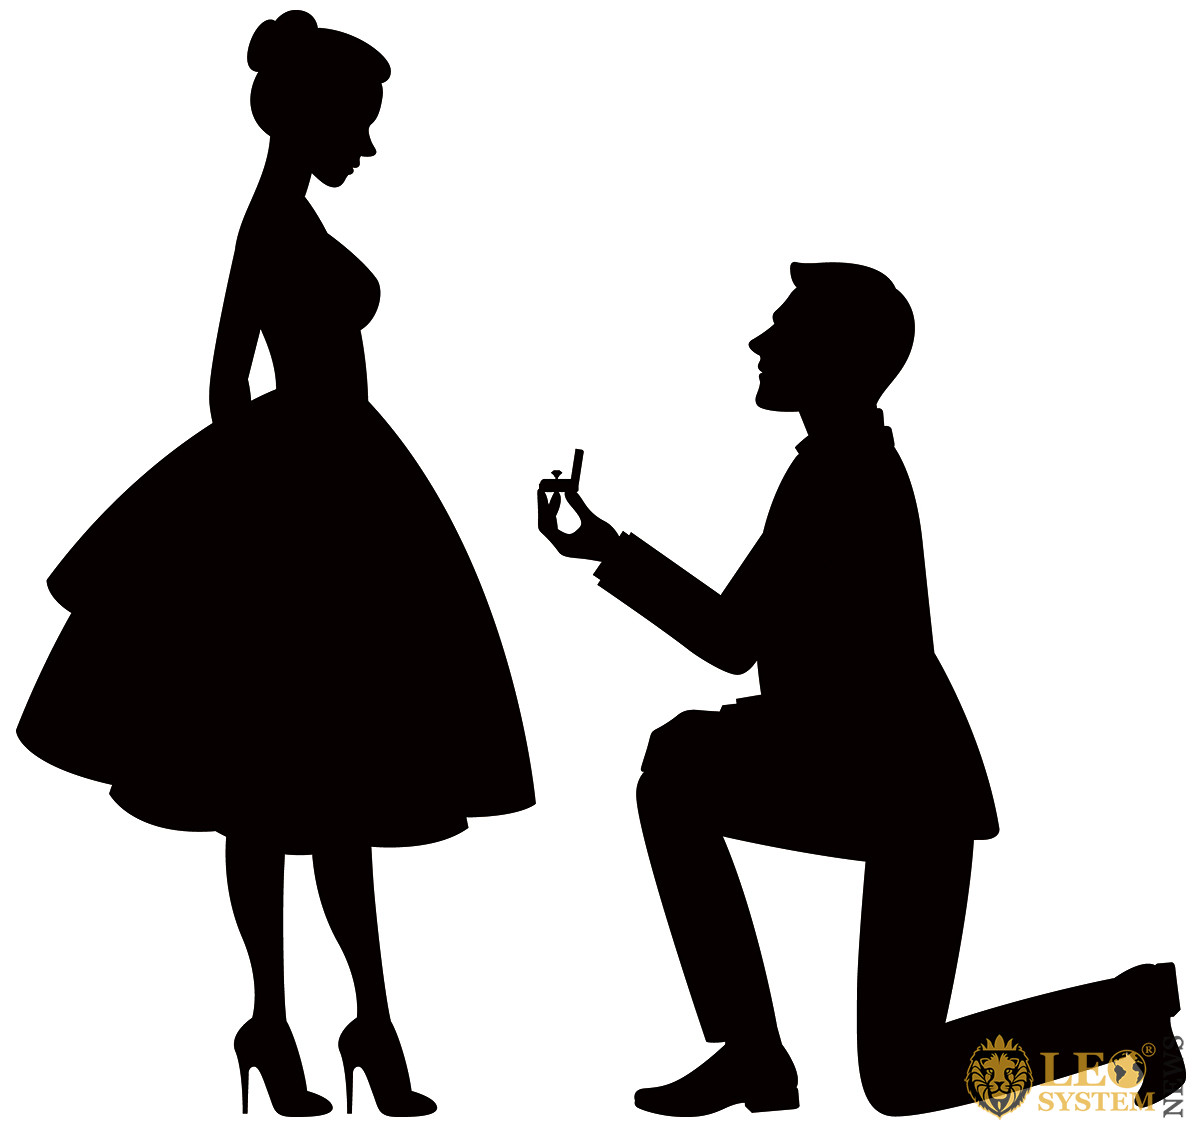 Image of a man who gives a gold ring to a girl